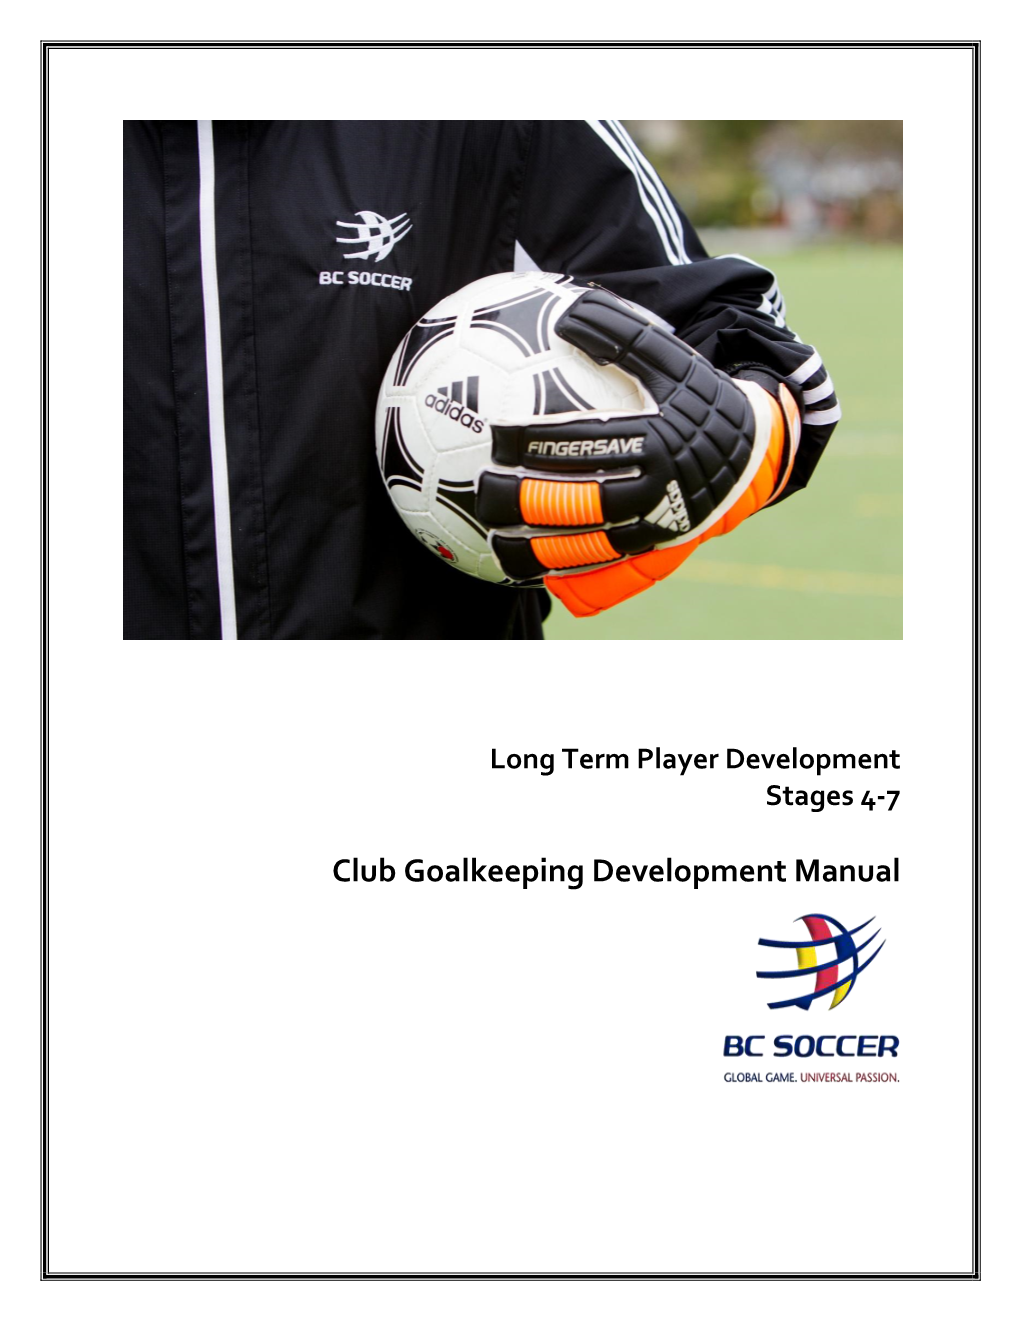 Goalkeeping Development Manual Stages